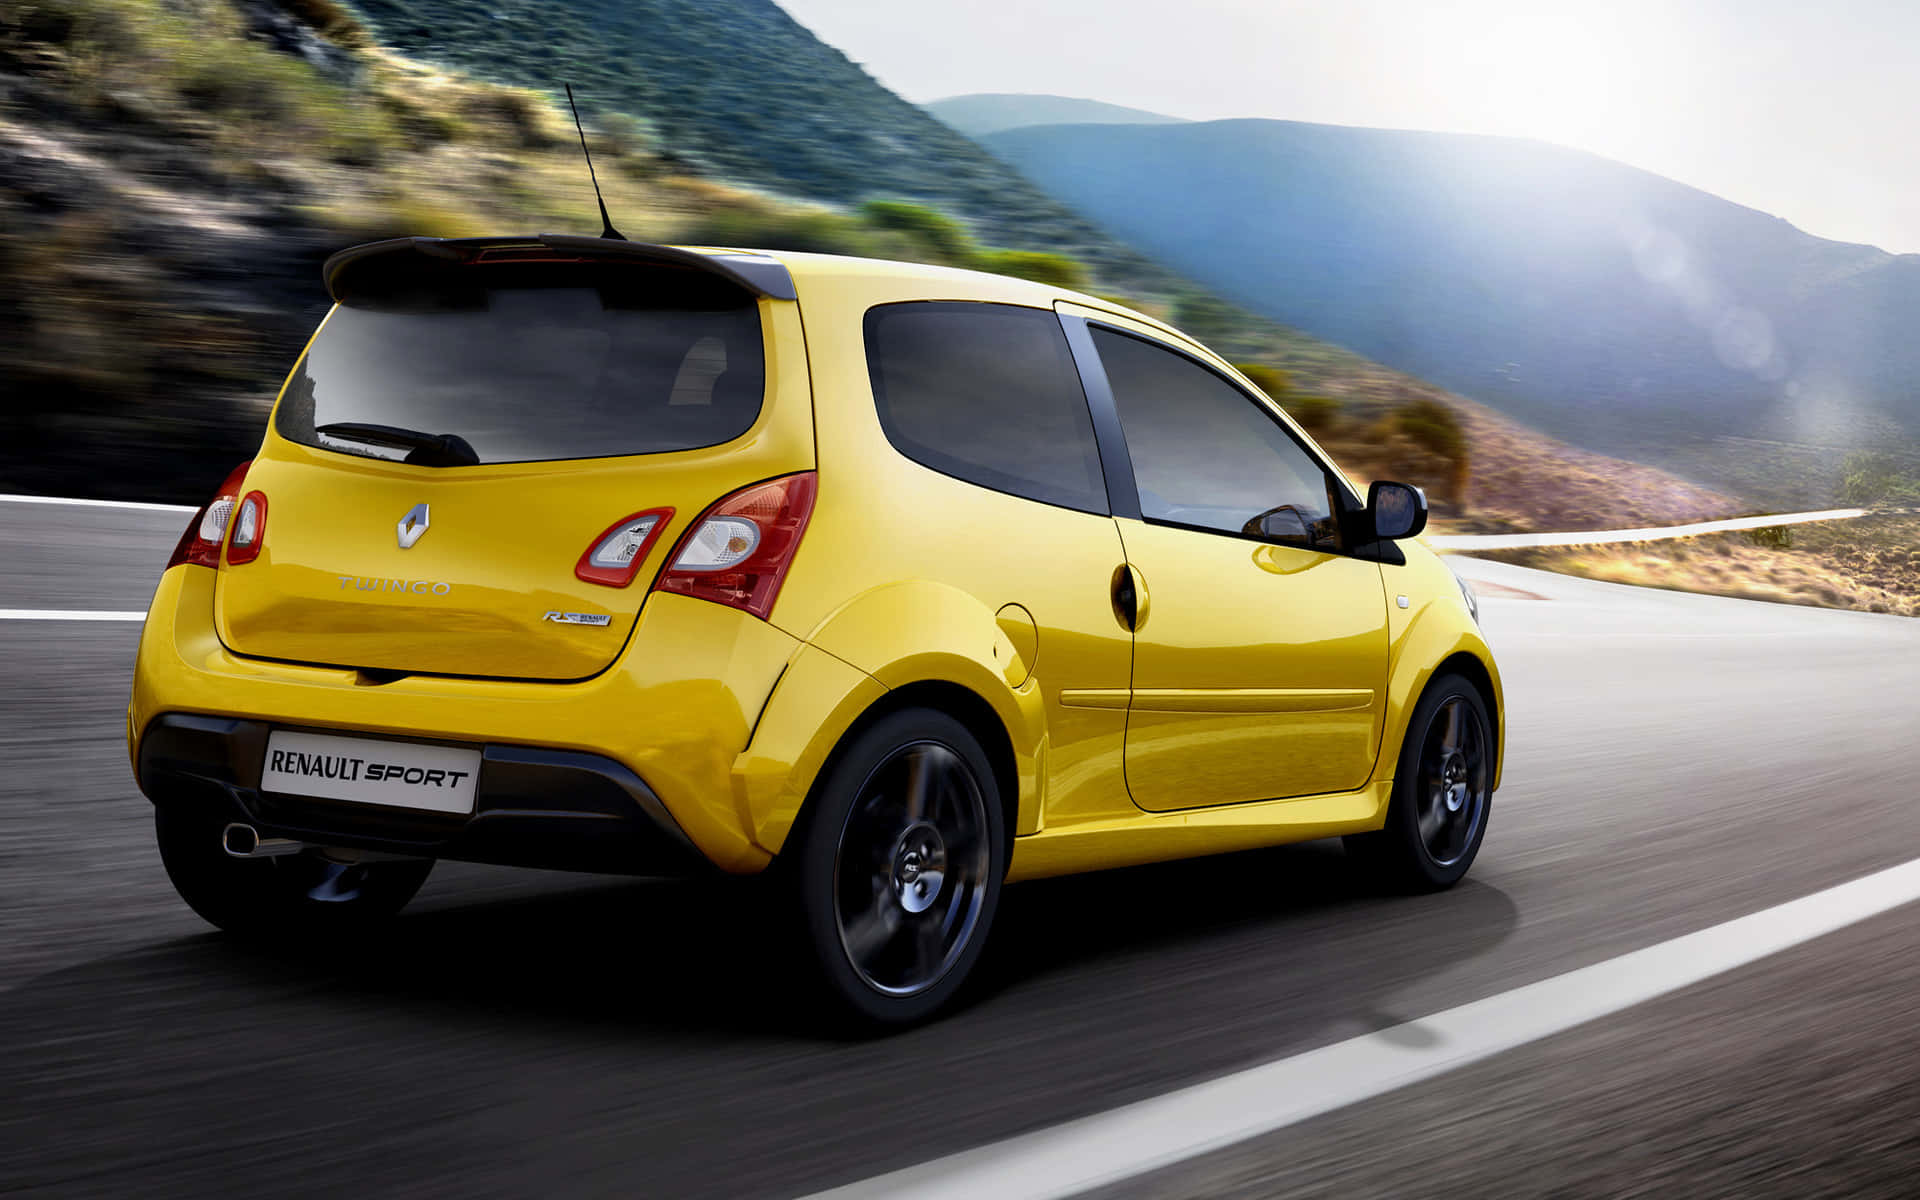 Stylish And Trendy Renault Twingo On The City Streets. Wallpaper